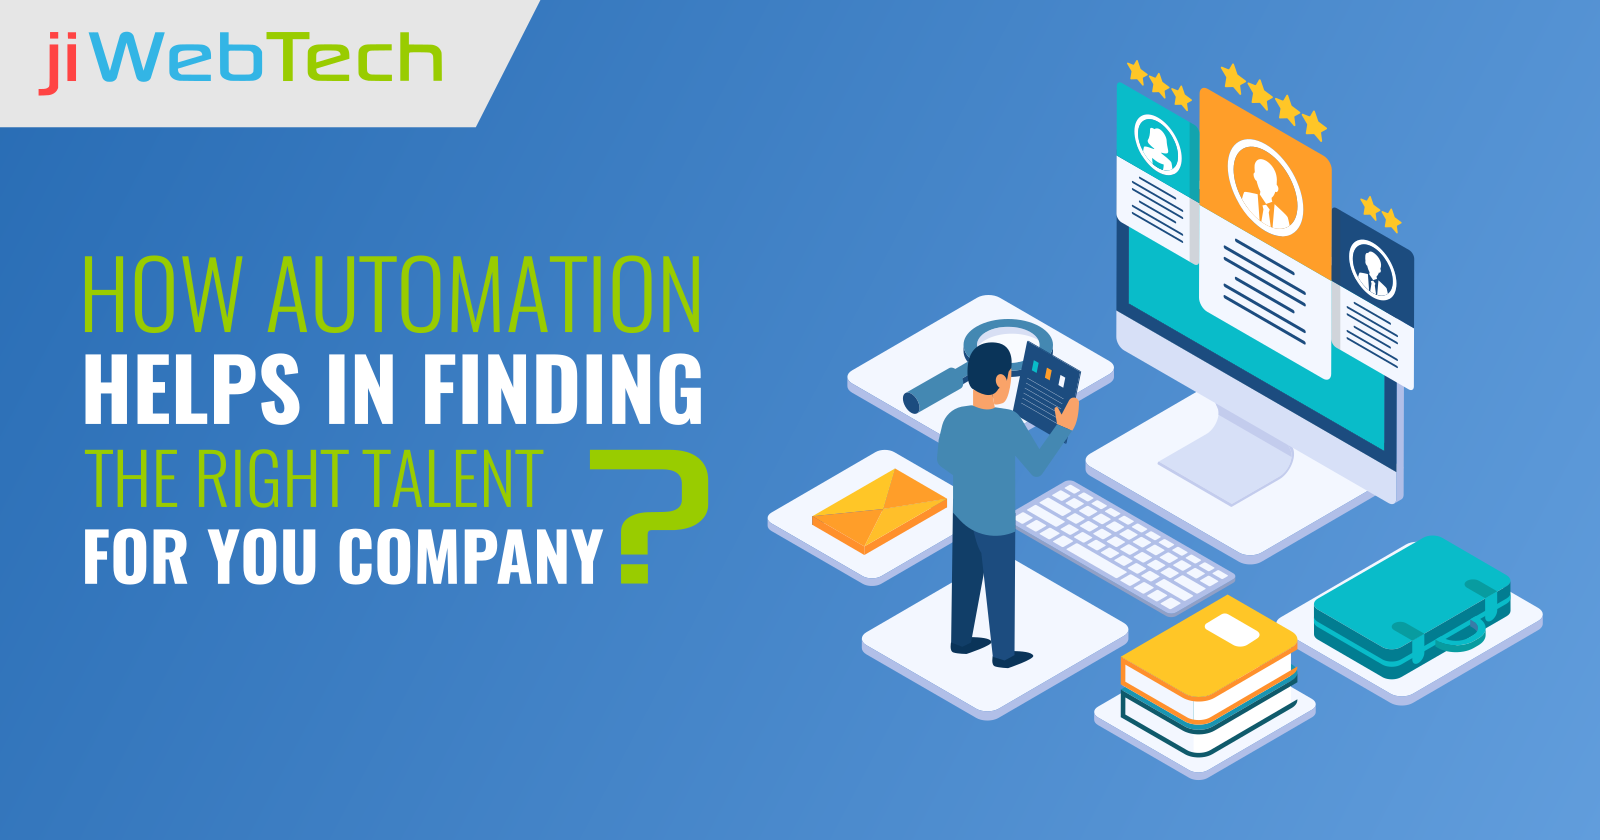 How Automation Helps in Finding the Right Talent for Your Company?